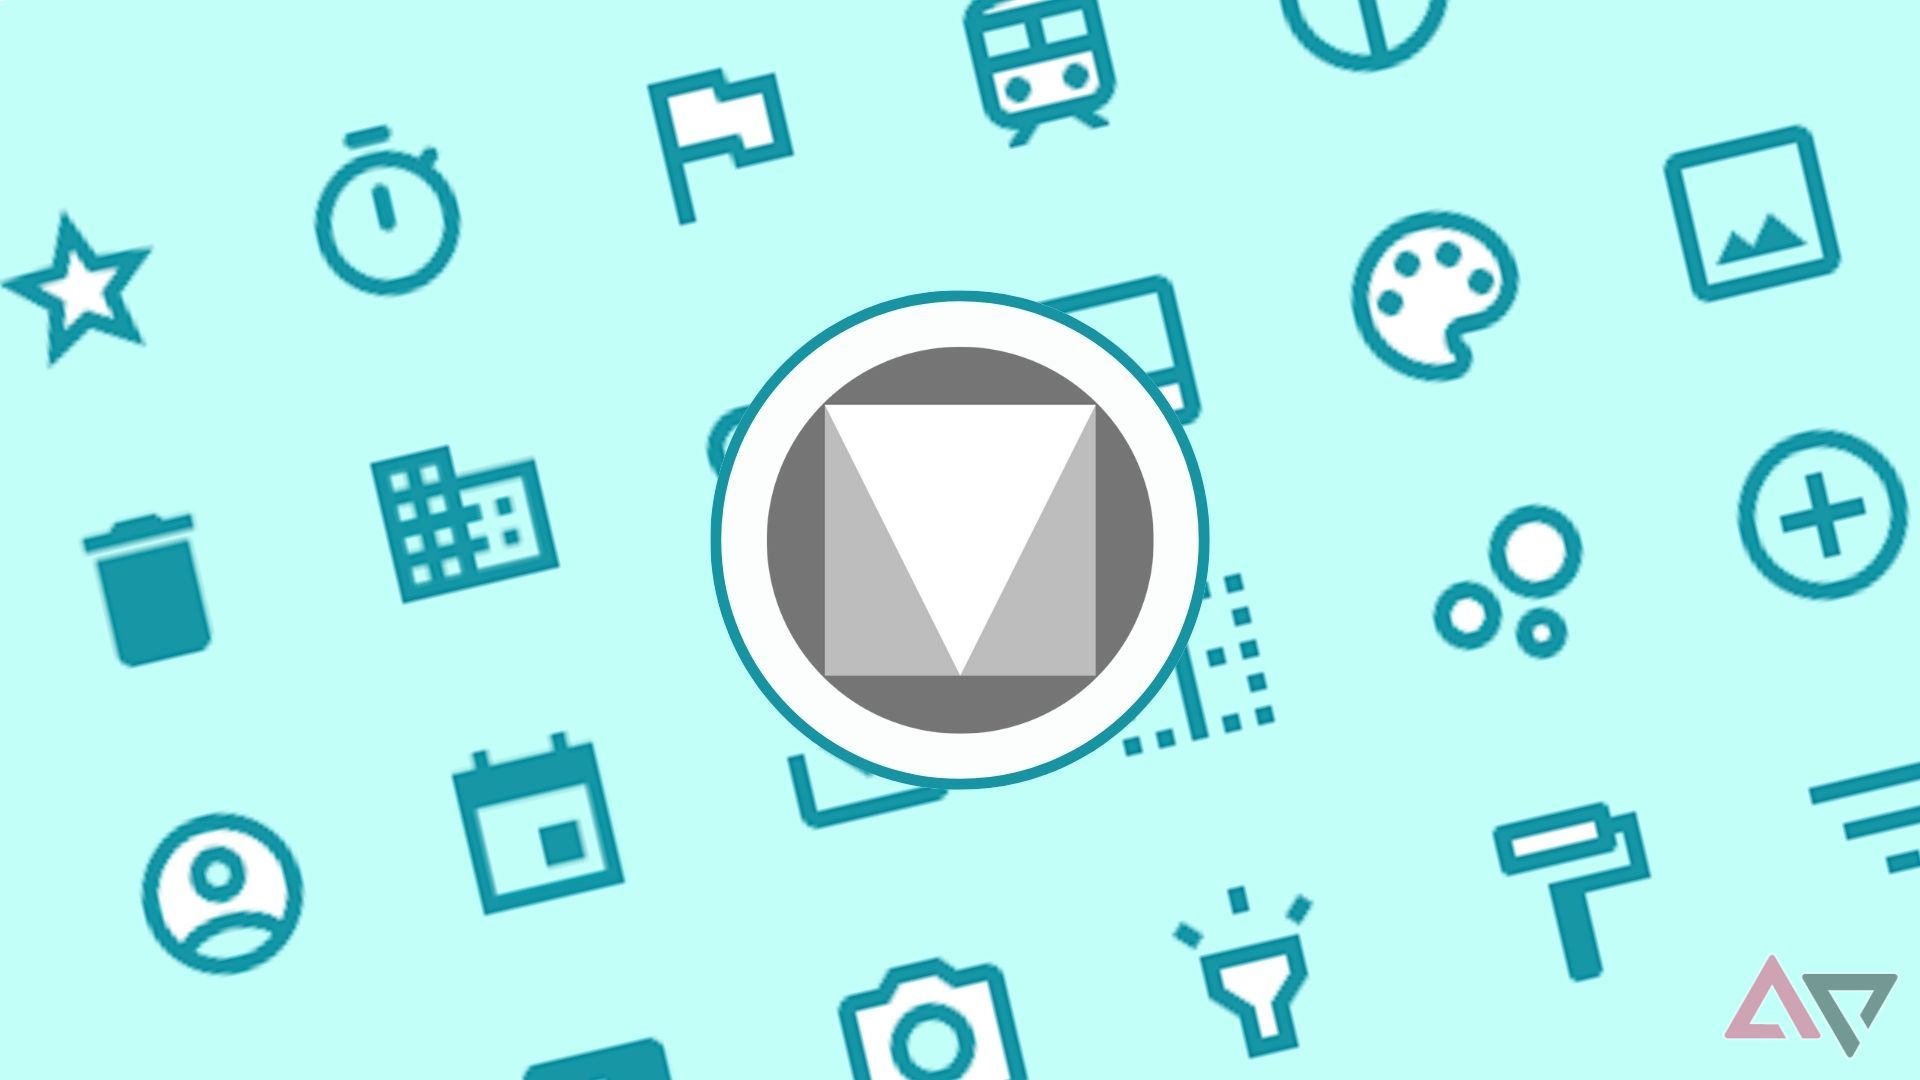 material design logo in front of icons